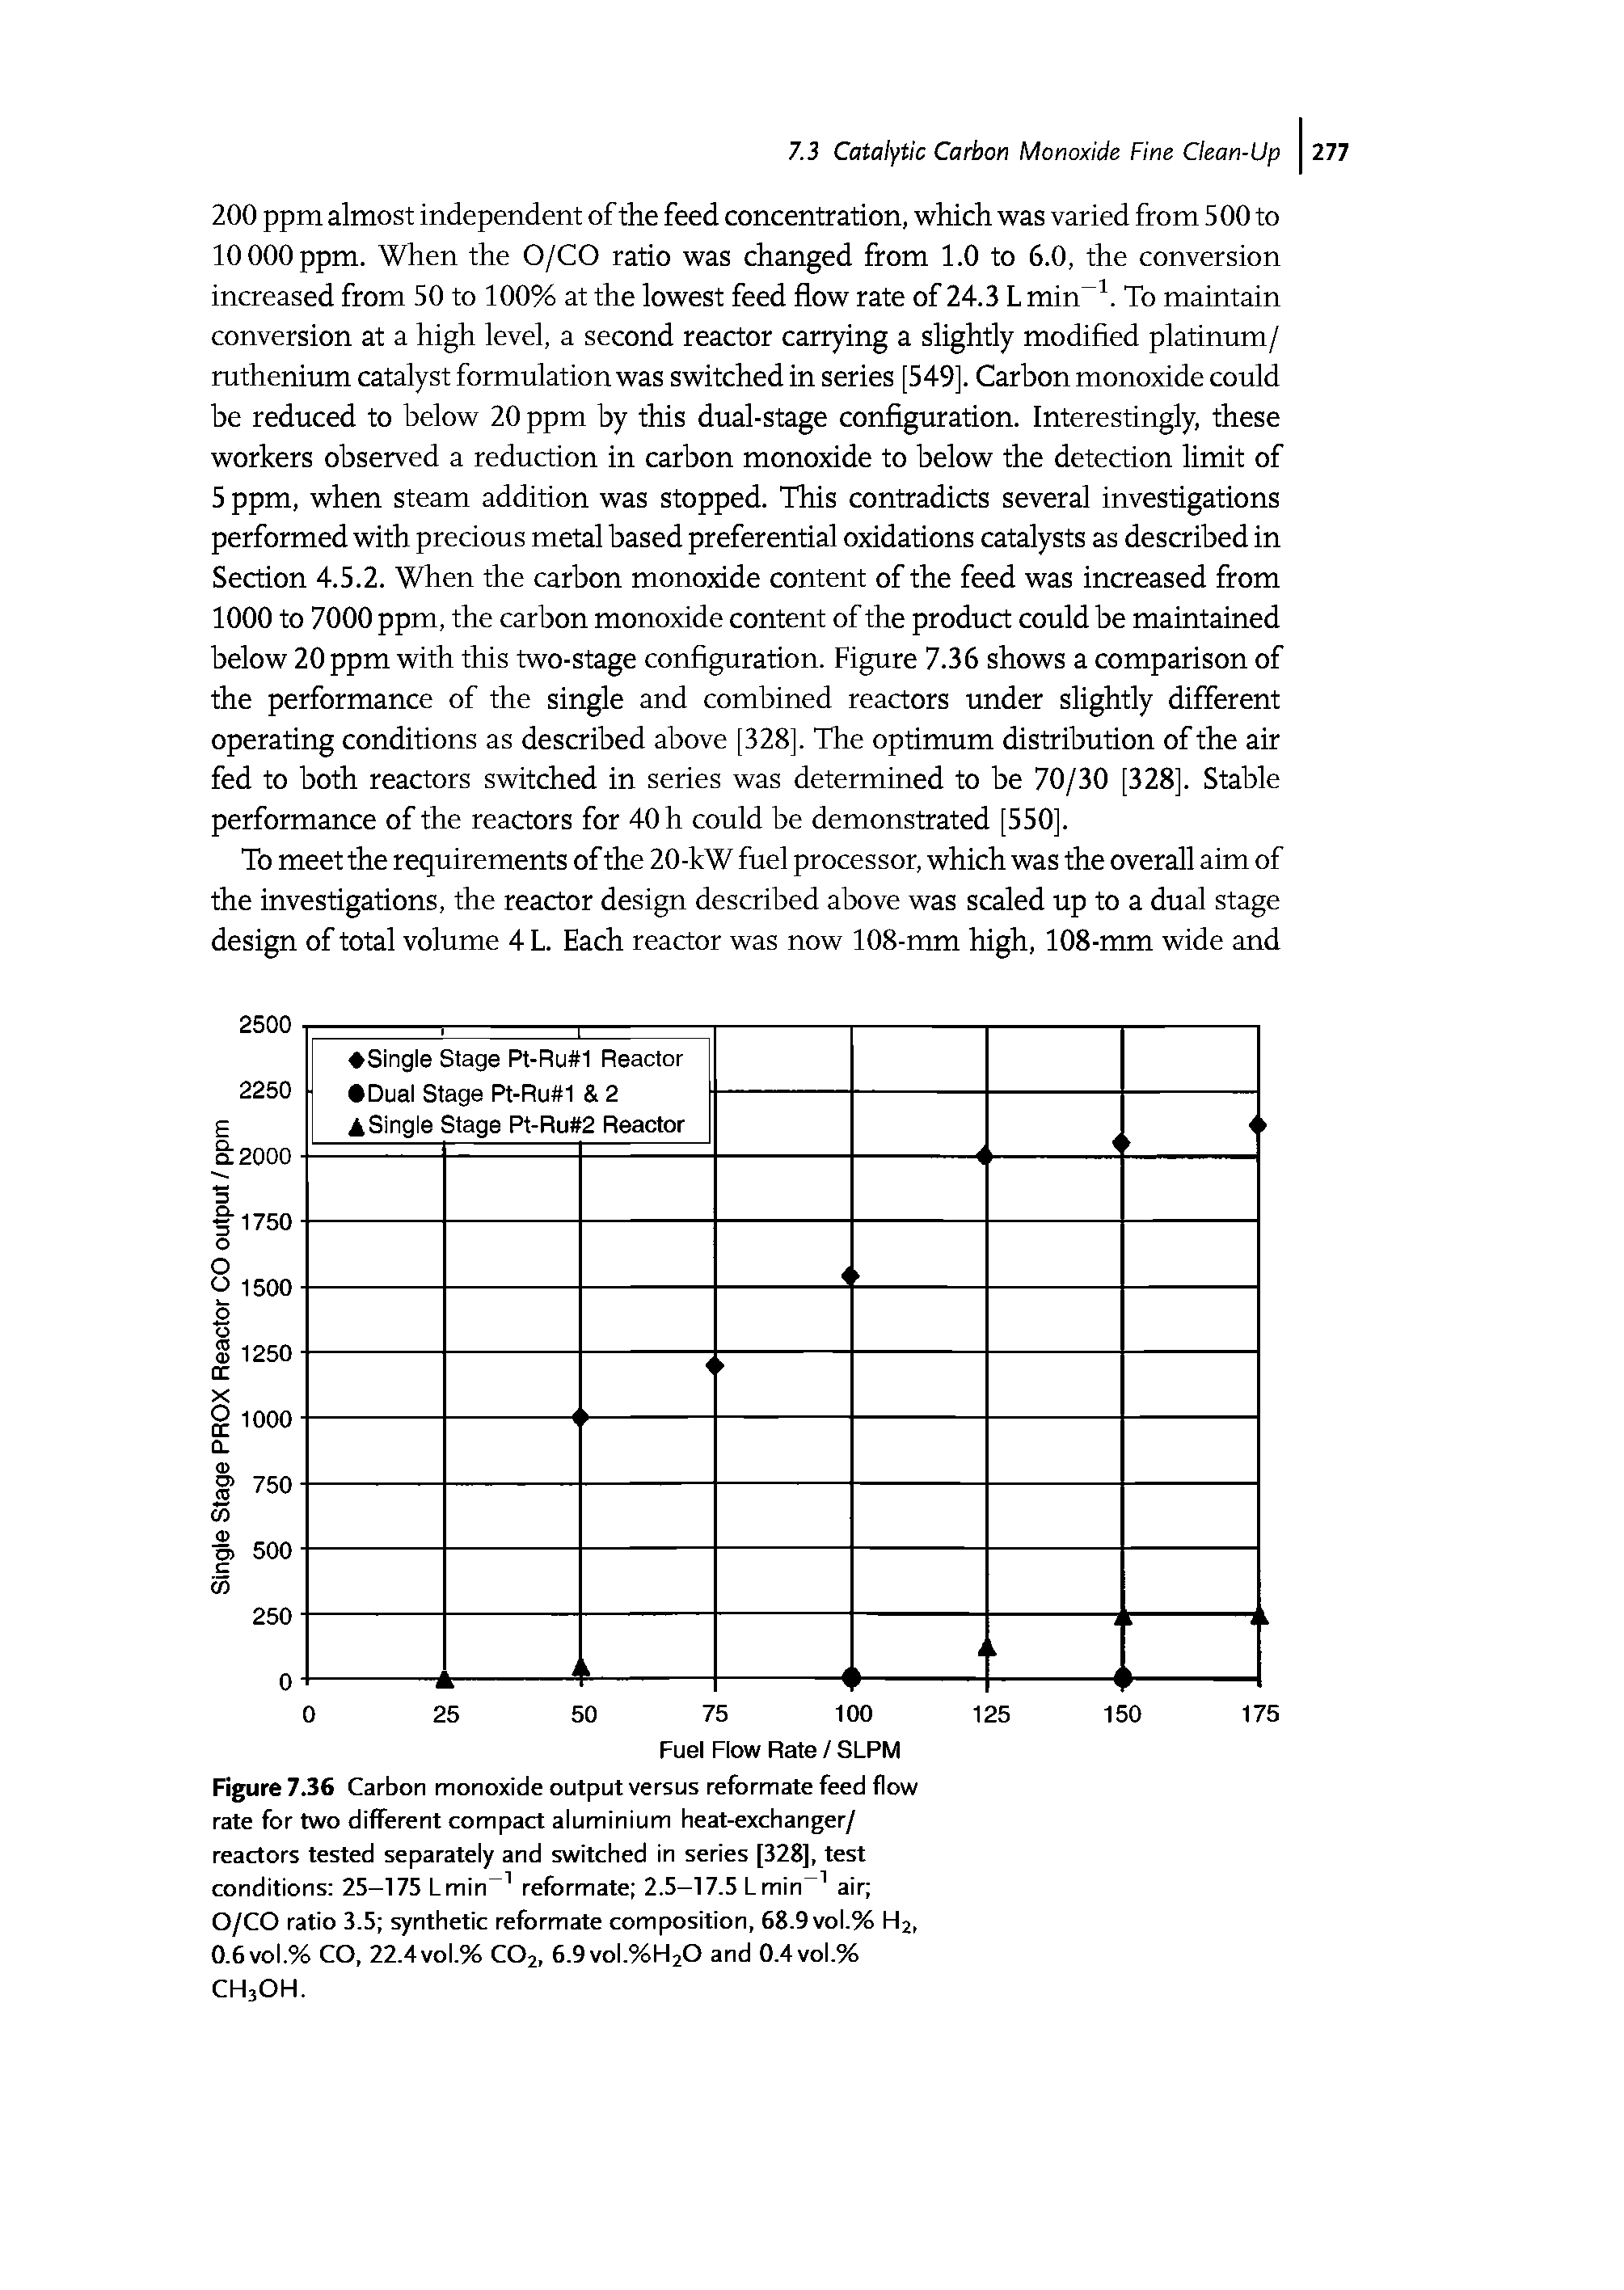 Figure 736 Carbon monoxide output versus reformate feed flow rate for two different compact aluminium heat-exchanger/ reactors tested separately and switched in series [328], test conditions 25-175 Lmin reformate 2.5-17.5 Lmin air O/CO ratio 3.5 synthetic reformate composition, 68.9vol.% Hj, 0.6vol.% CO, 22.4vol.% COj, 6.9vol.%H20 and 0.4vol.% CH3OH.